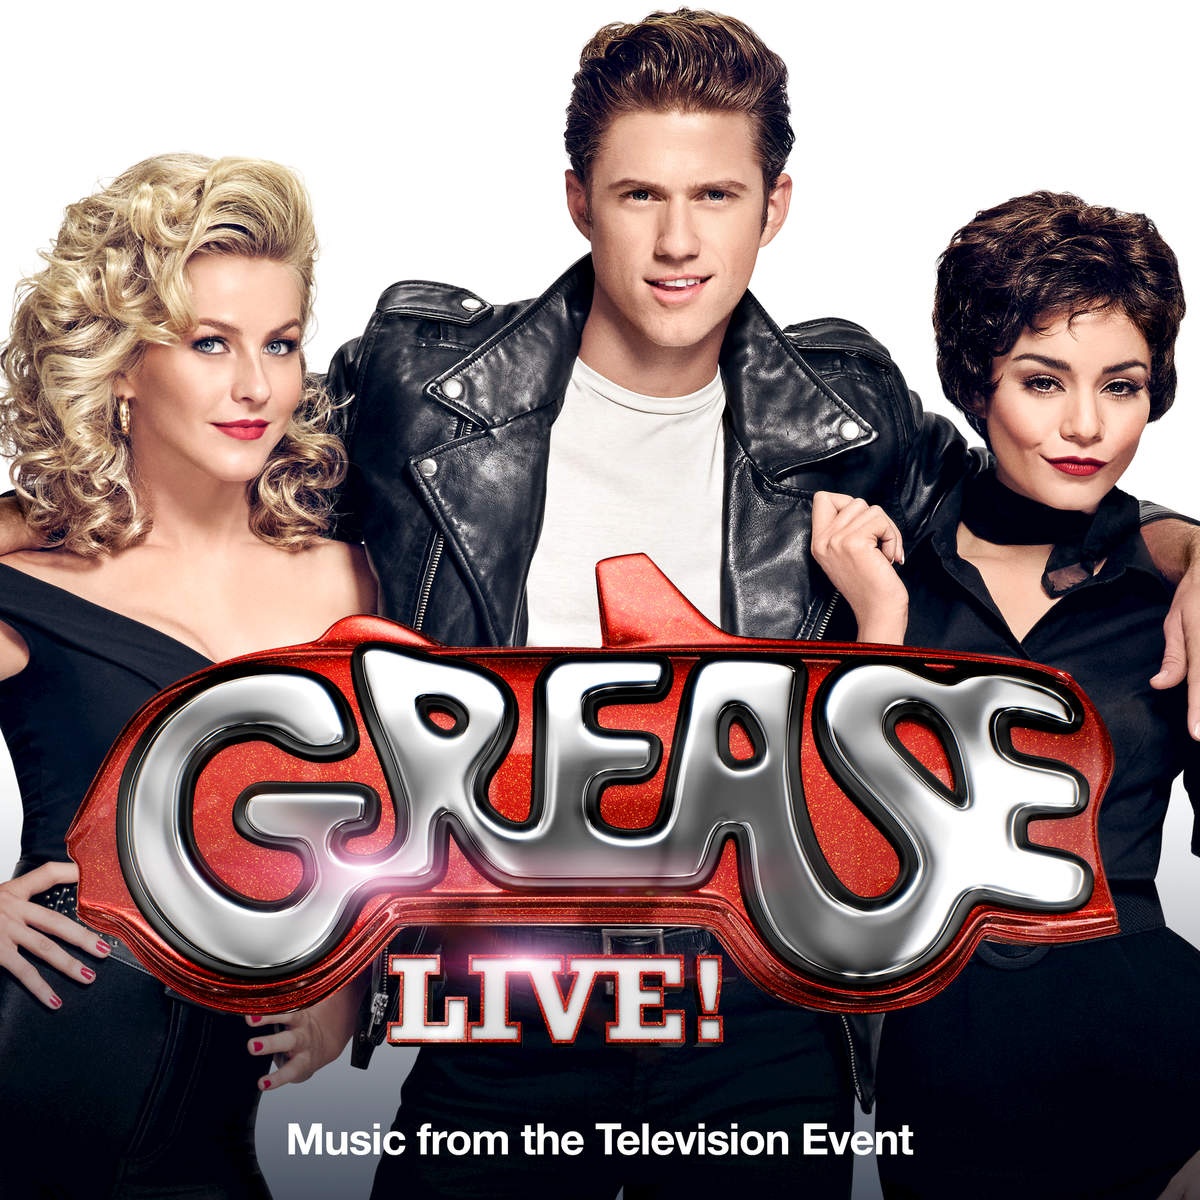 We Go Together - From "Grease Live!" Music From The Television Event